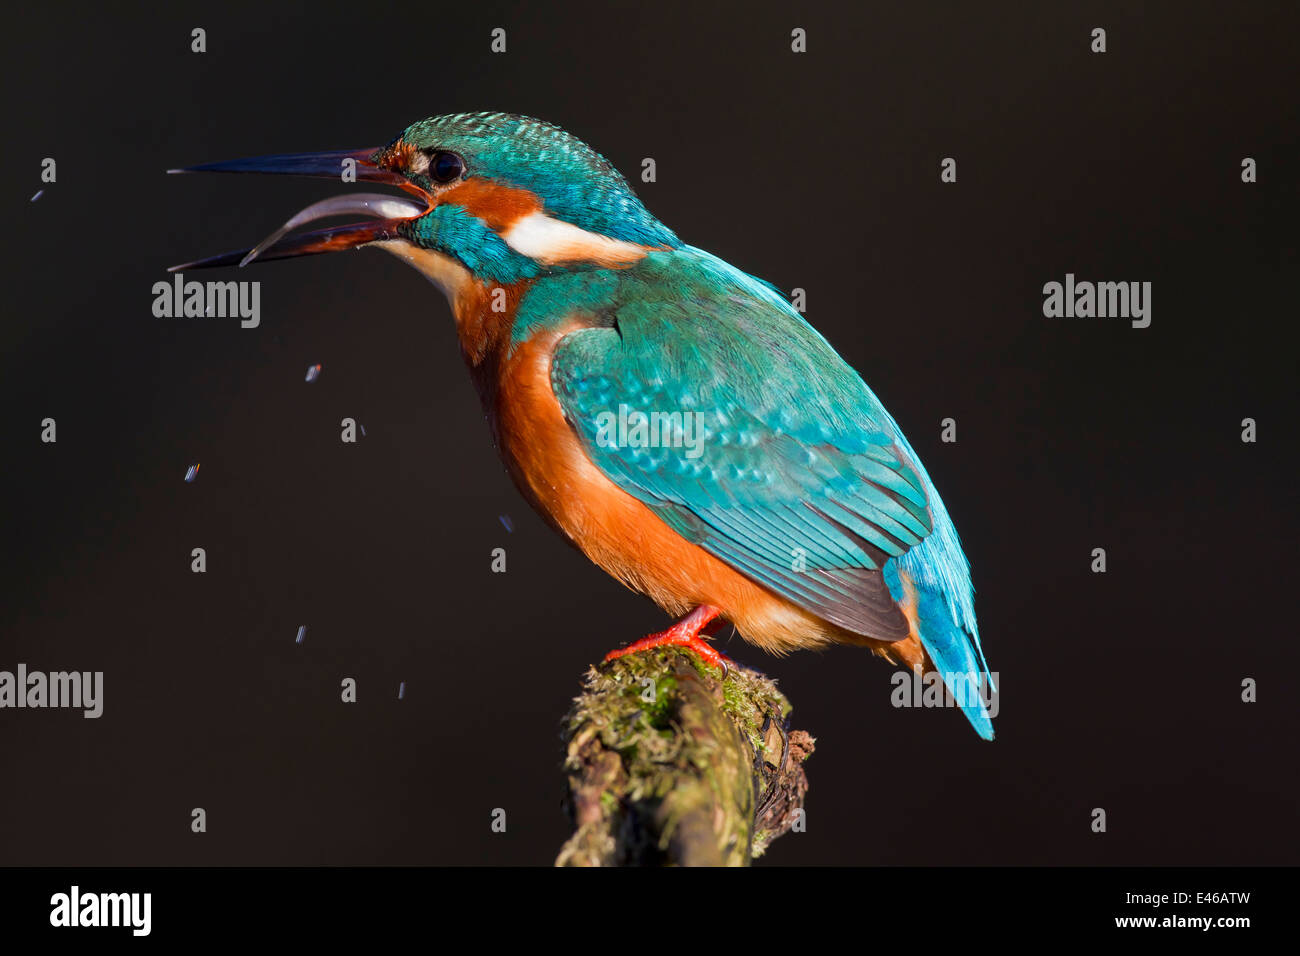 Common kingfisher / Eurasian kingfisher (Alcedo atthis) perched on branch and swallowing caught fish head first Stock Photo